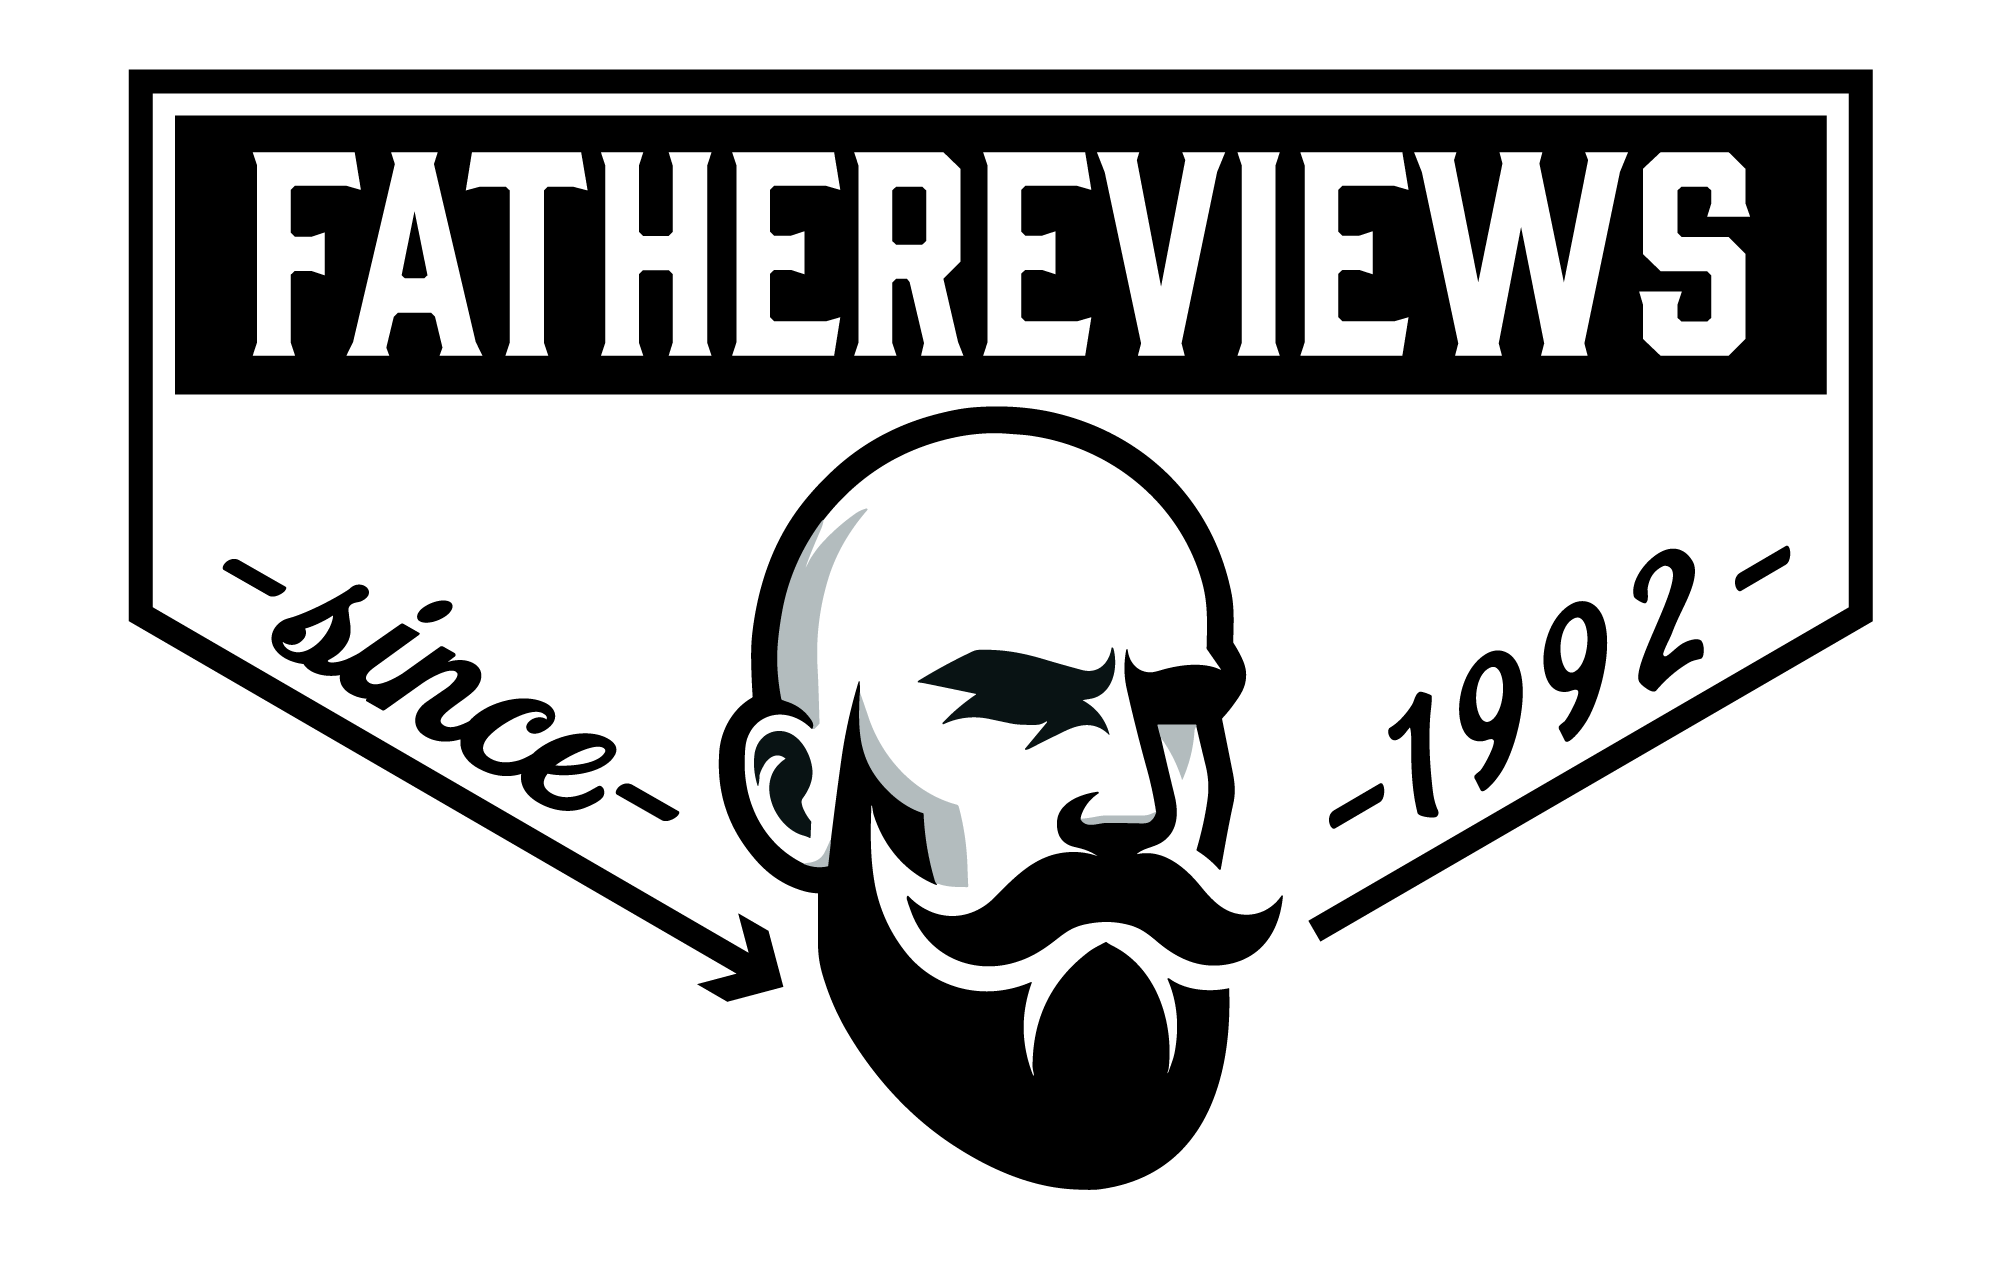 Fathereviews